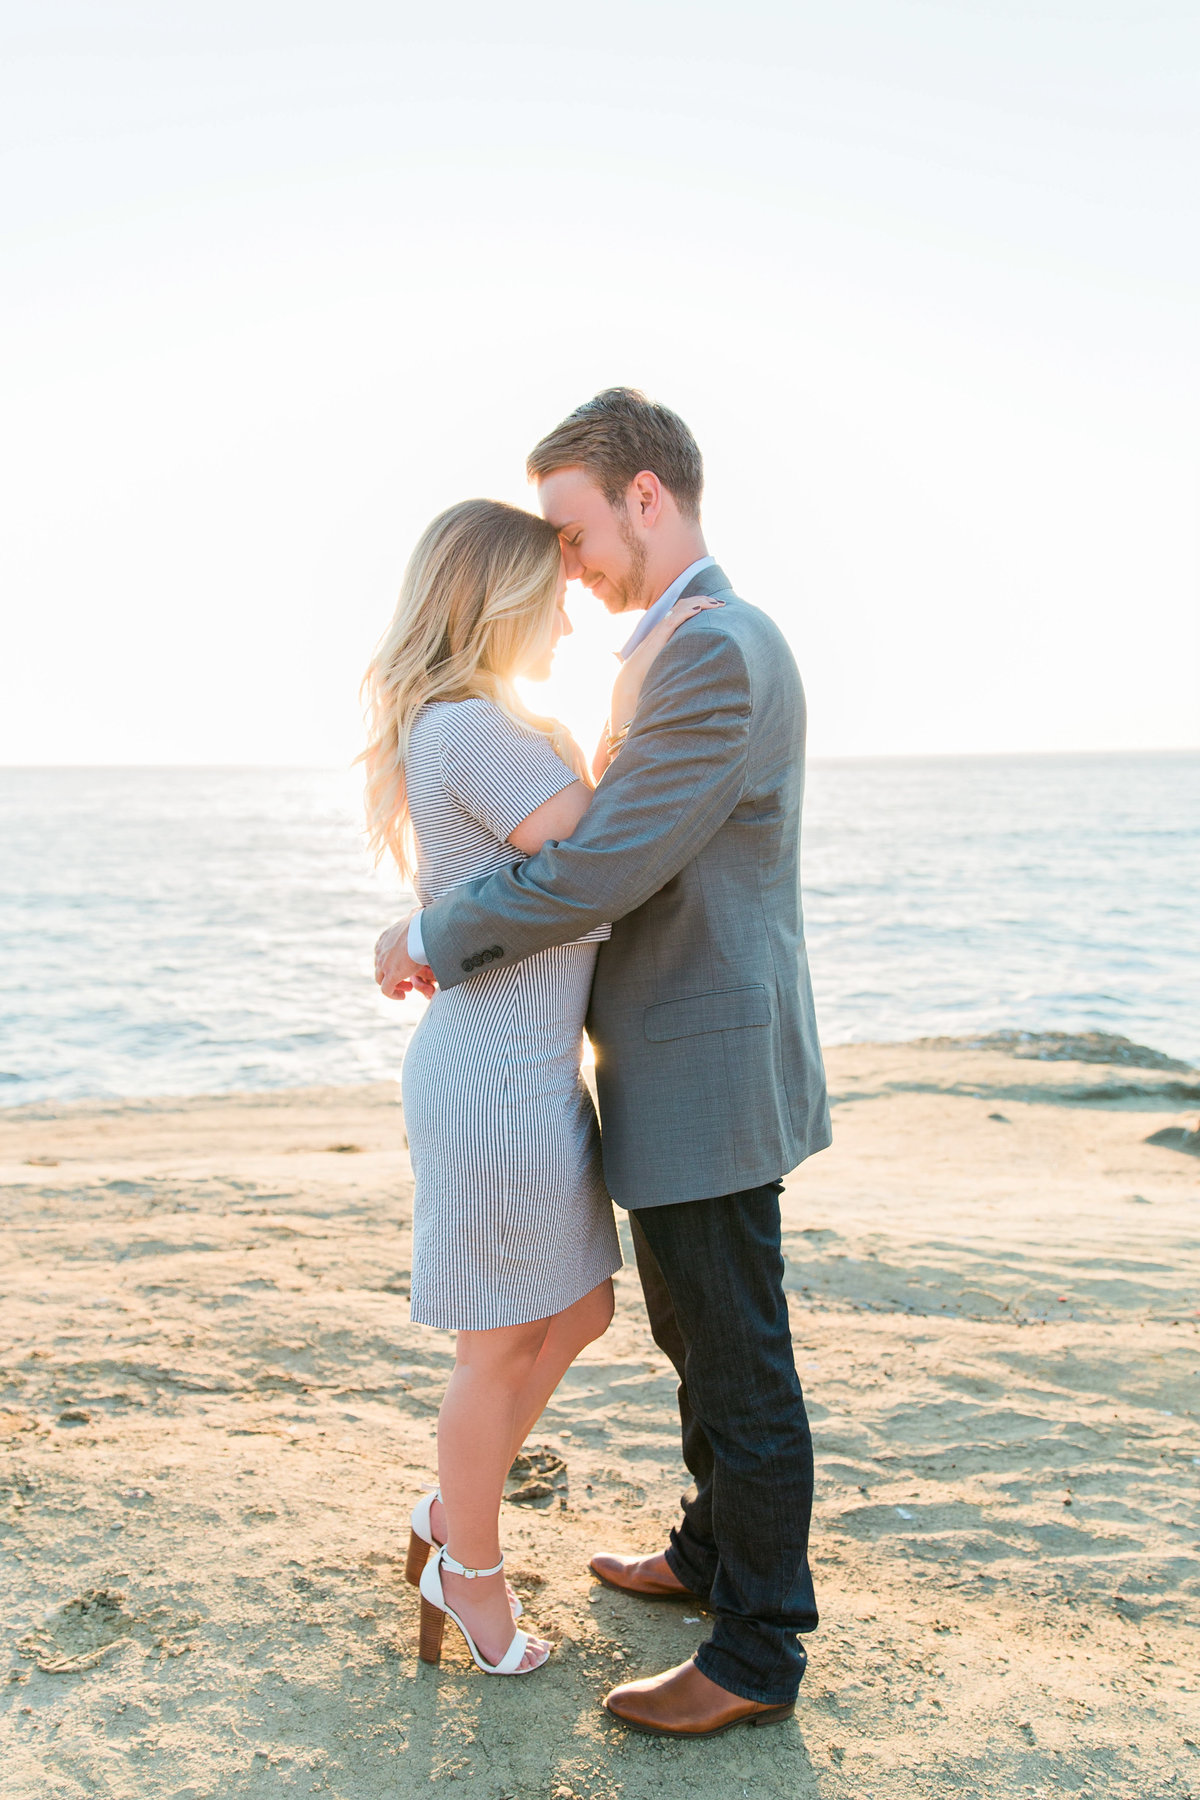 babsie-ly-photography-surprise-proposal-photographer-san-diego-california-sunset-cliffs-epic-scenery-009